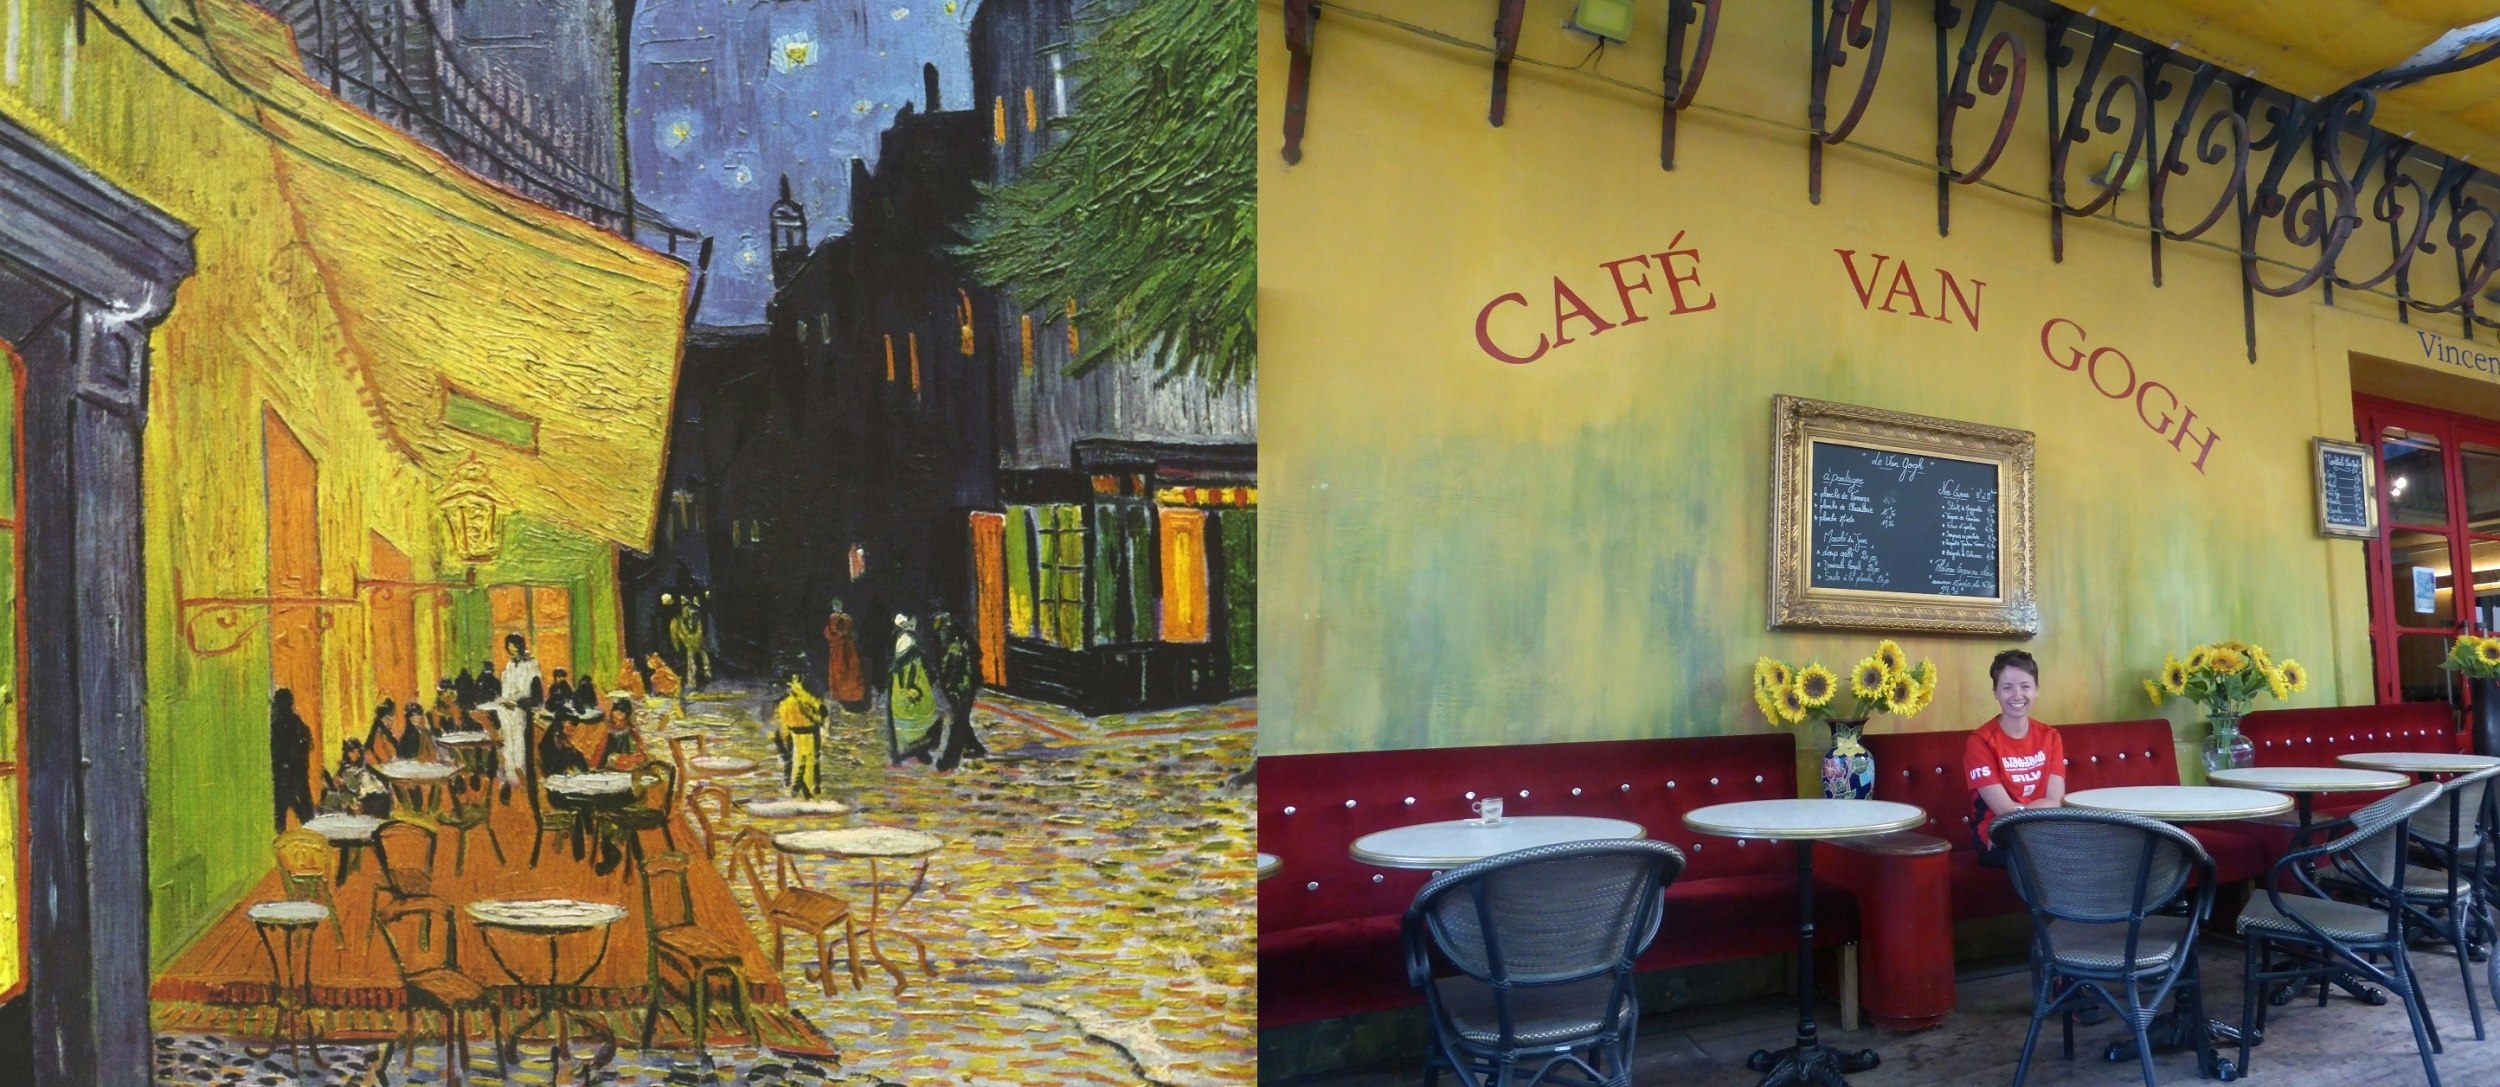 Vincent van Gogh's famous Cafe Terrace at Night painting; it looks down the length of tables sitting outside a cafe at night under a starry sky. The picture to the right is of Alecsa sitting at one of the tables pictured in Van Gogh's painting.